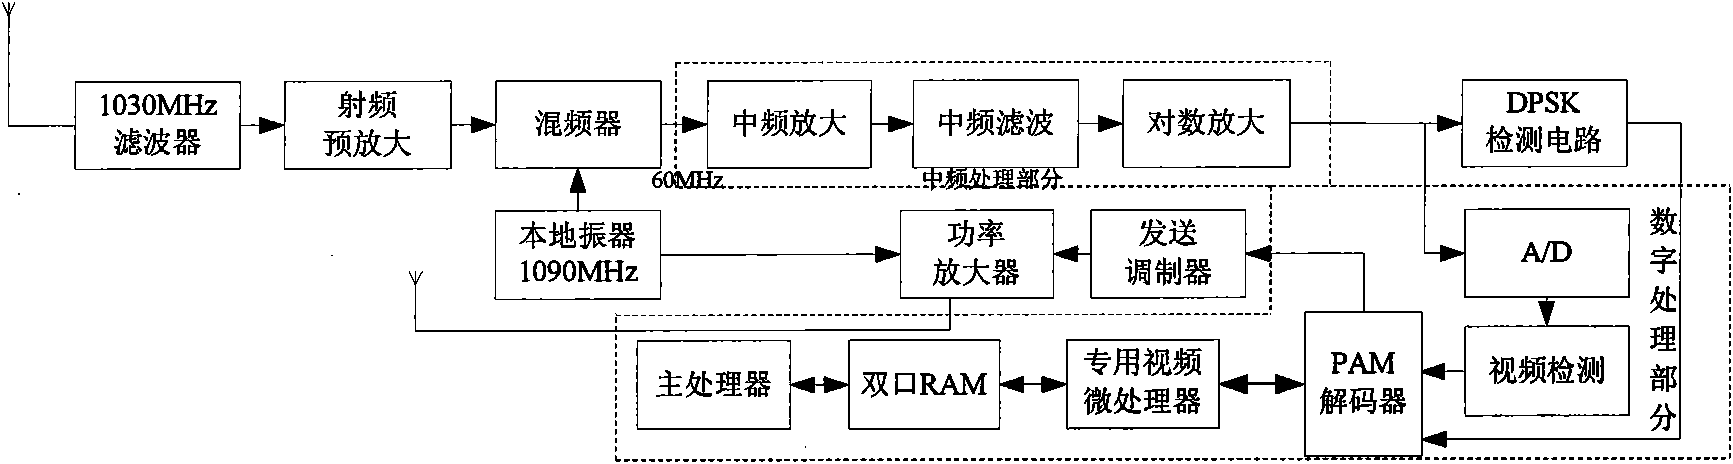 Method for integrating transceiver circuit of traffic collision avoidance system (TCAS) with transceiver circuit of S-mode responder